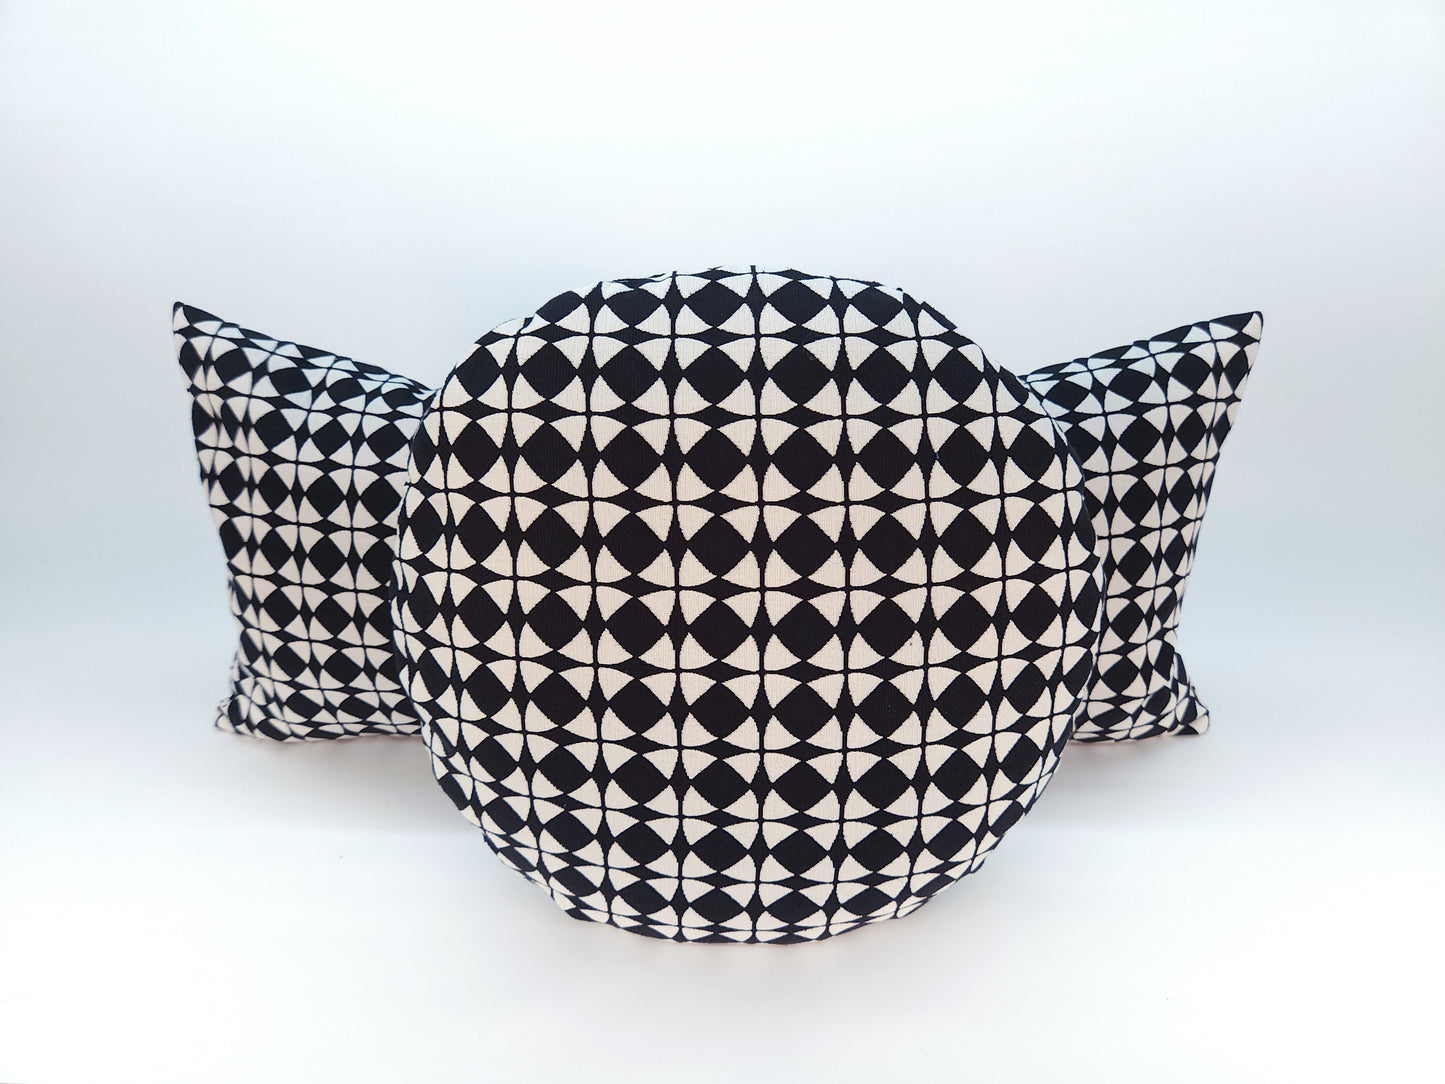 Explorer58 Round 16" Pillow Cover, Deep Space Black, with or without Feather Insert, Handmade by Houston and Scott